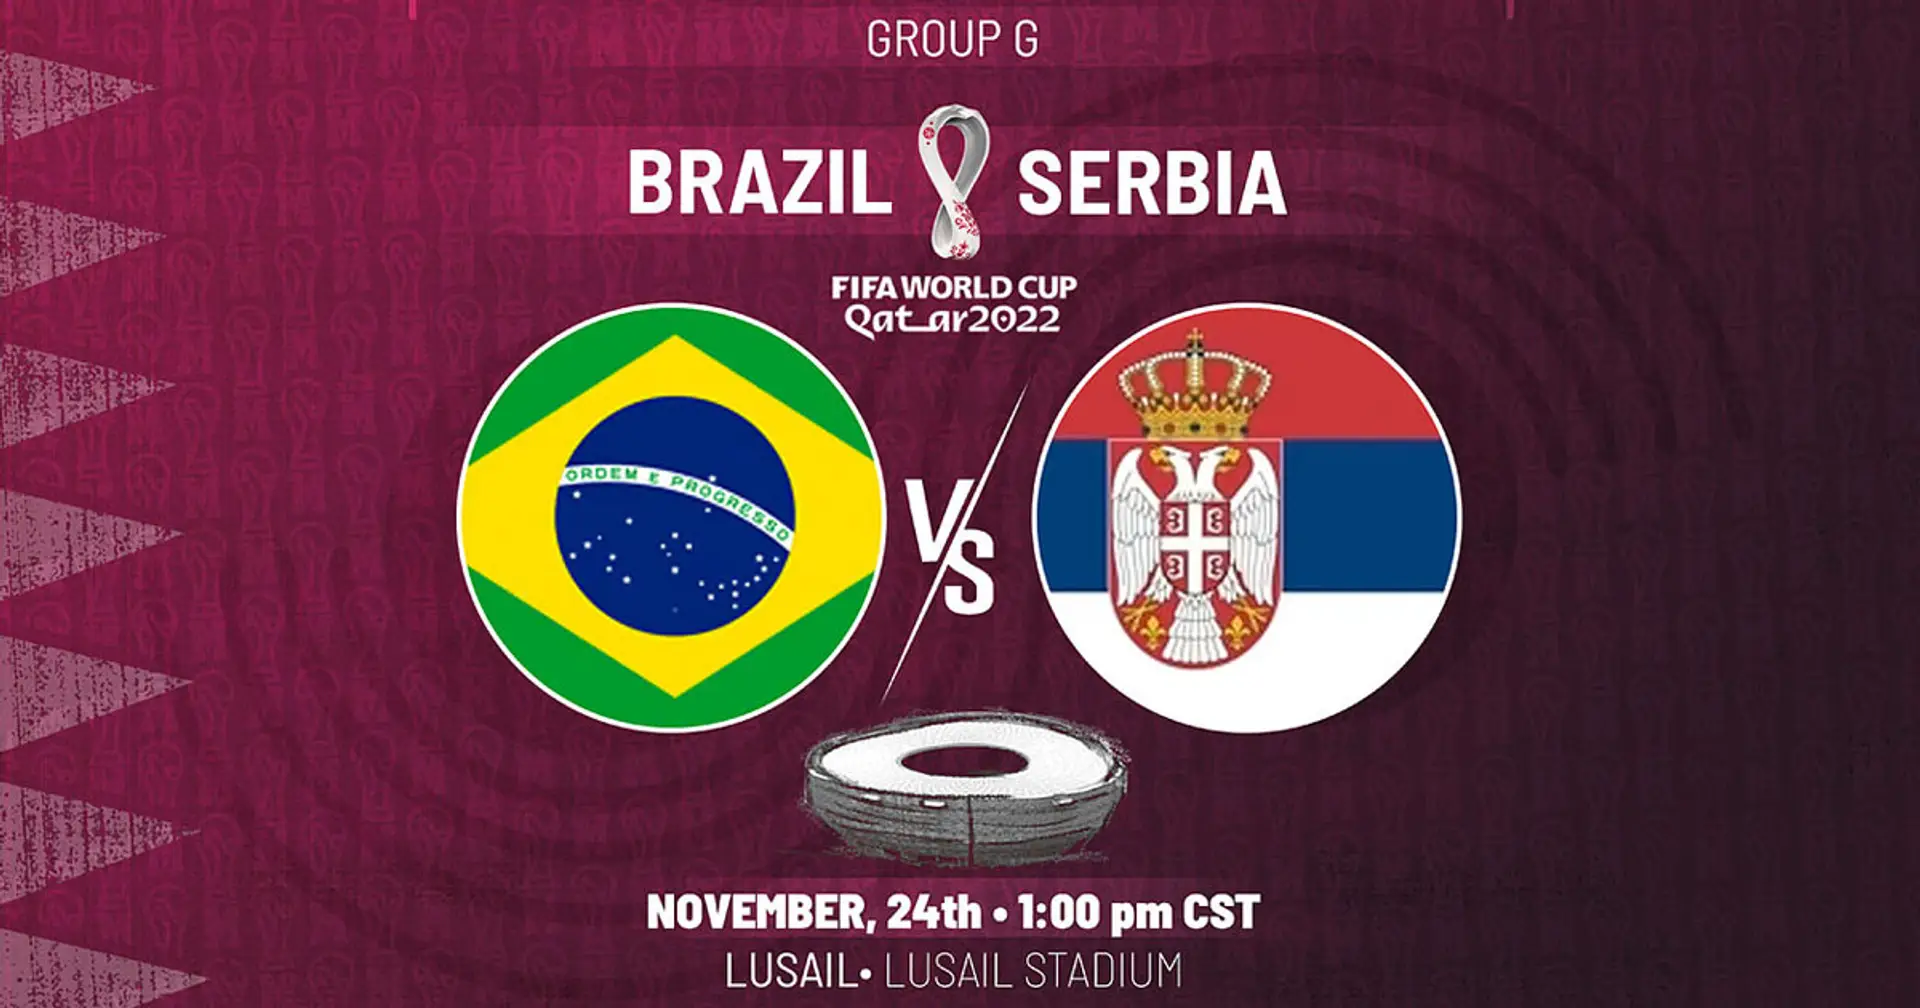 Brazil v Serbia: Official team lineups for the World Cup clash revealed